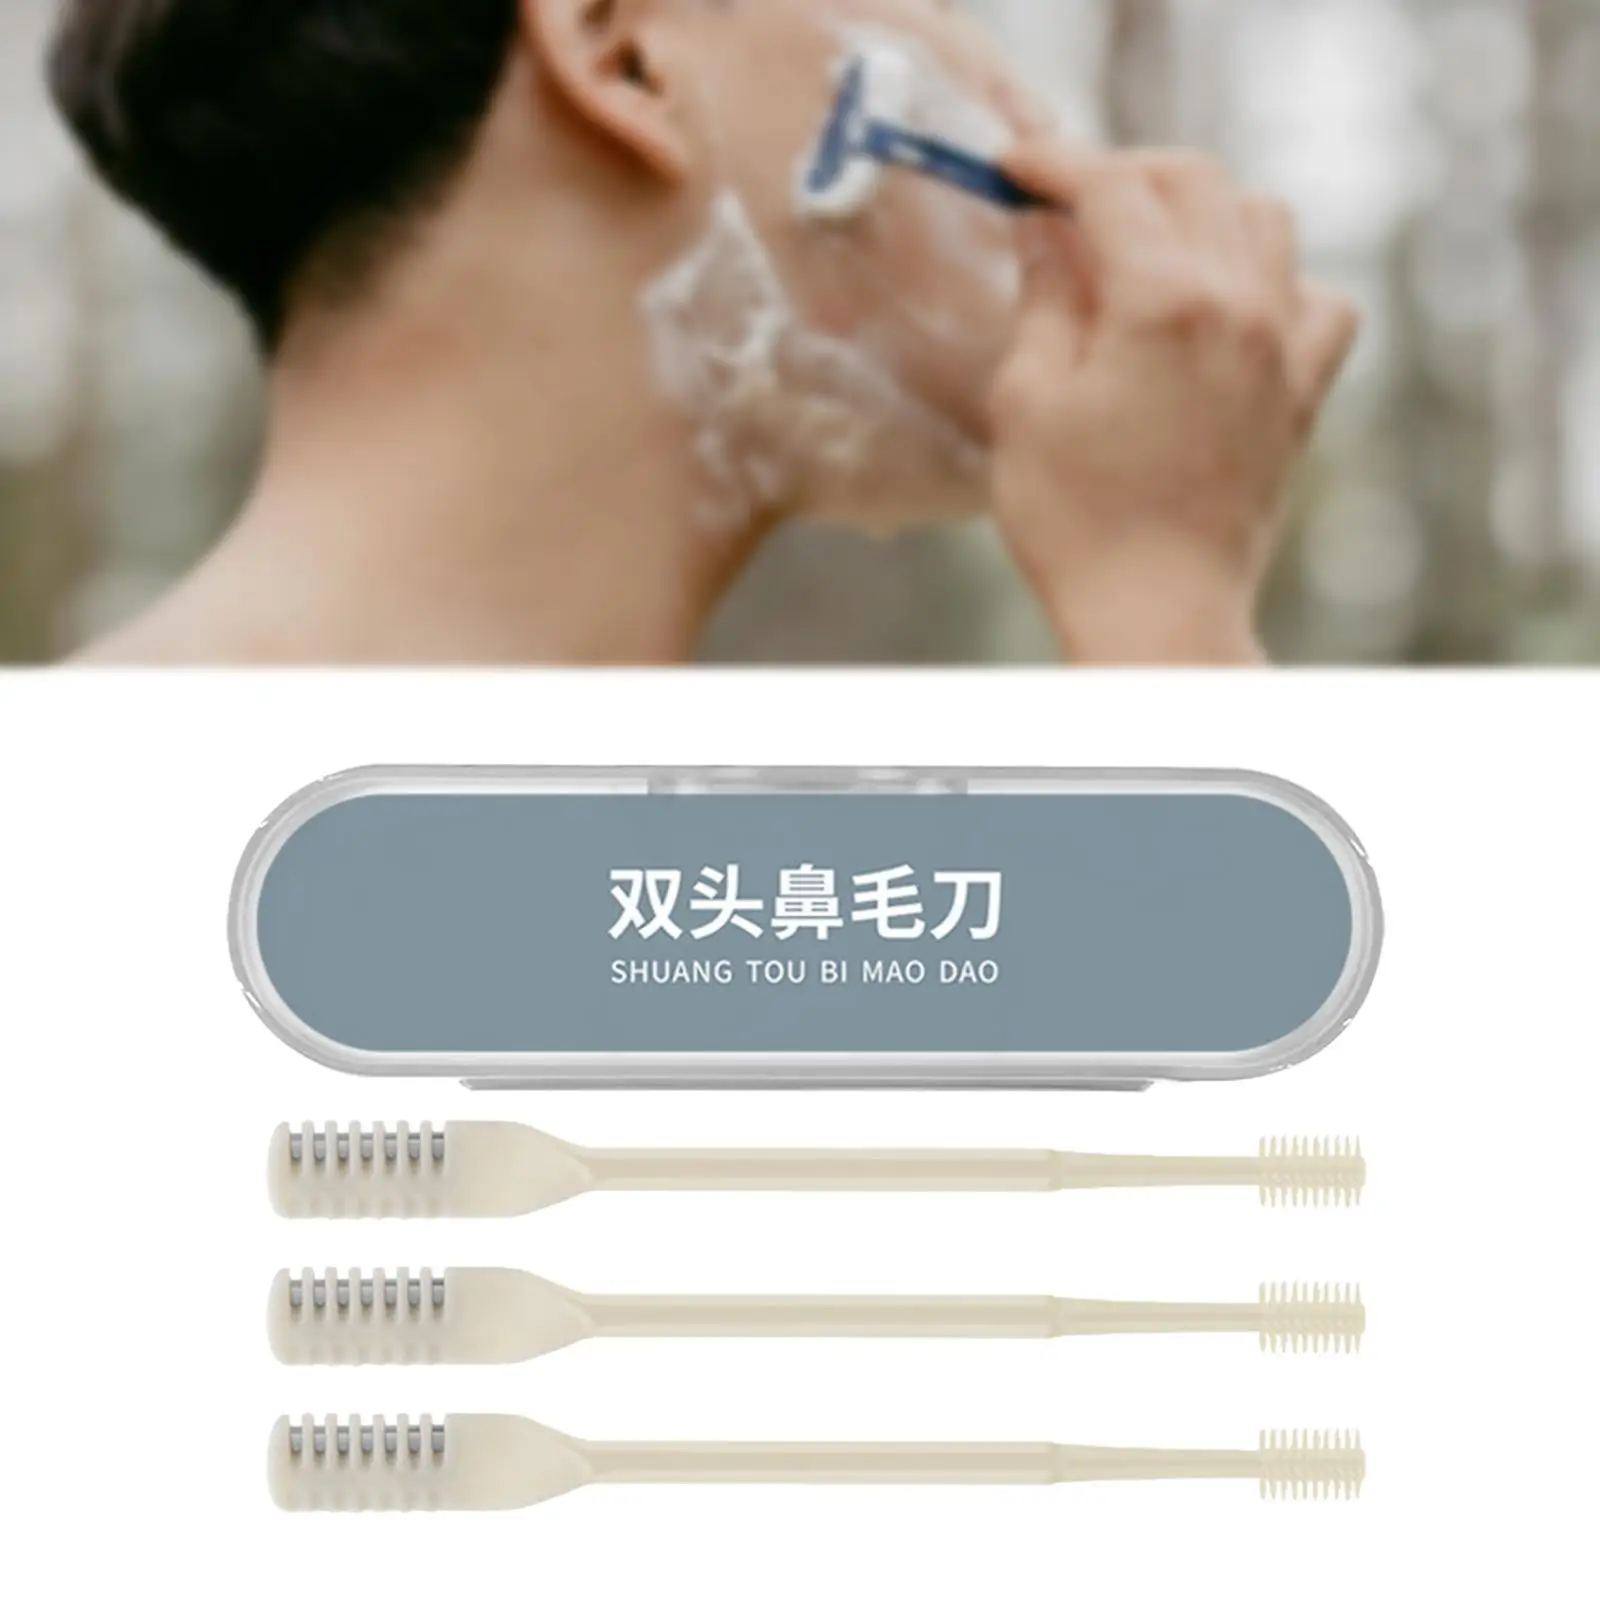 3x Portable Manual Nose Hair Trimmer Washable Battery Free Waterproof with Storage Box for Men and Women Nose Hair Removal